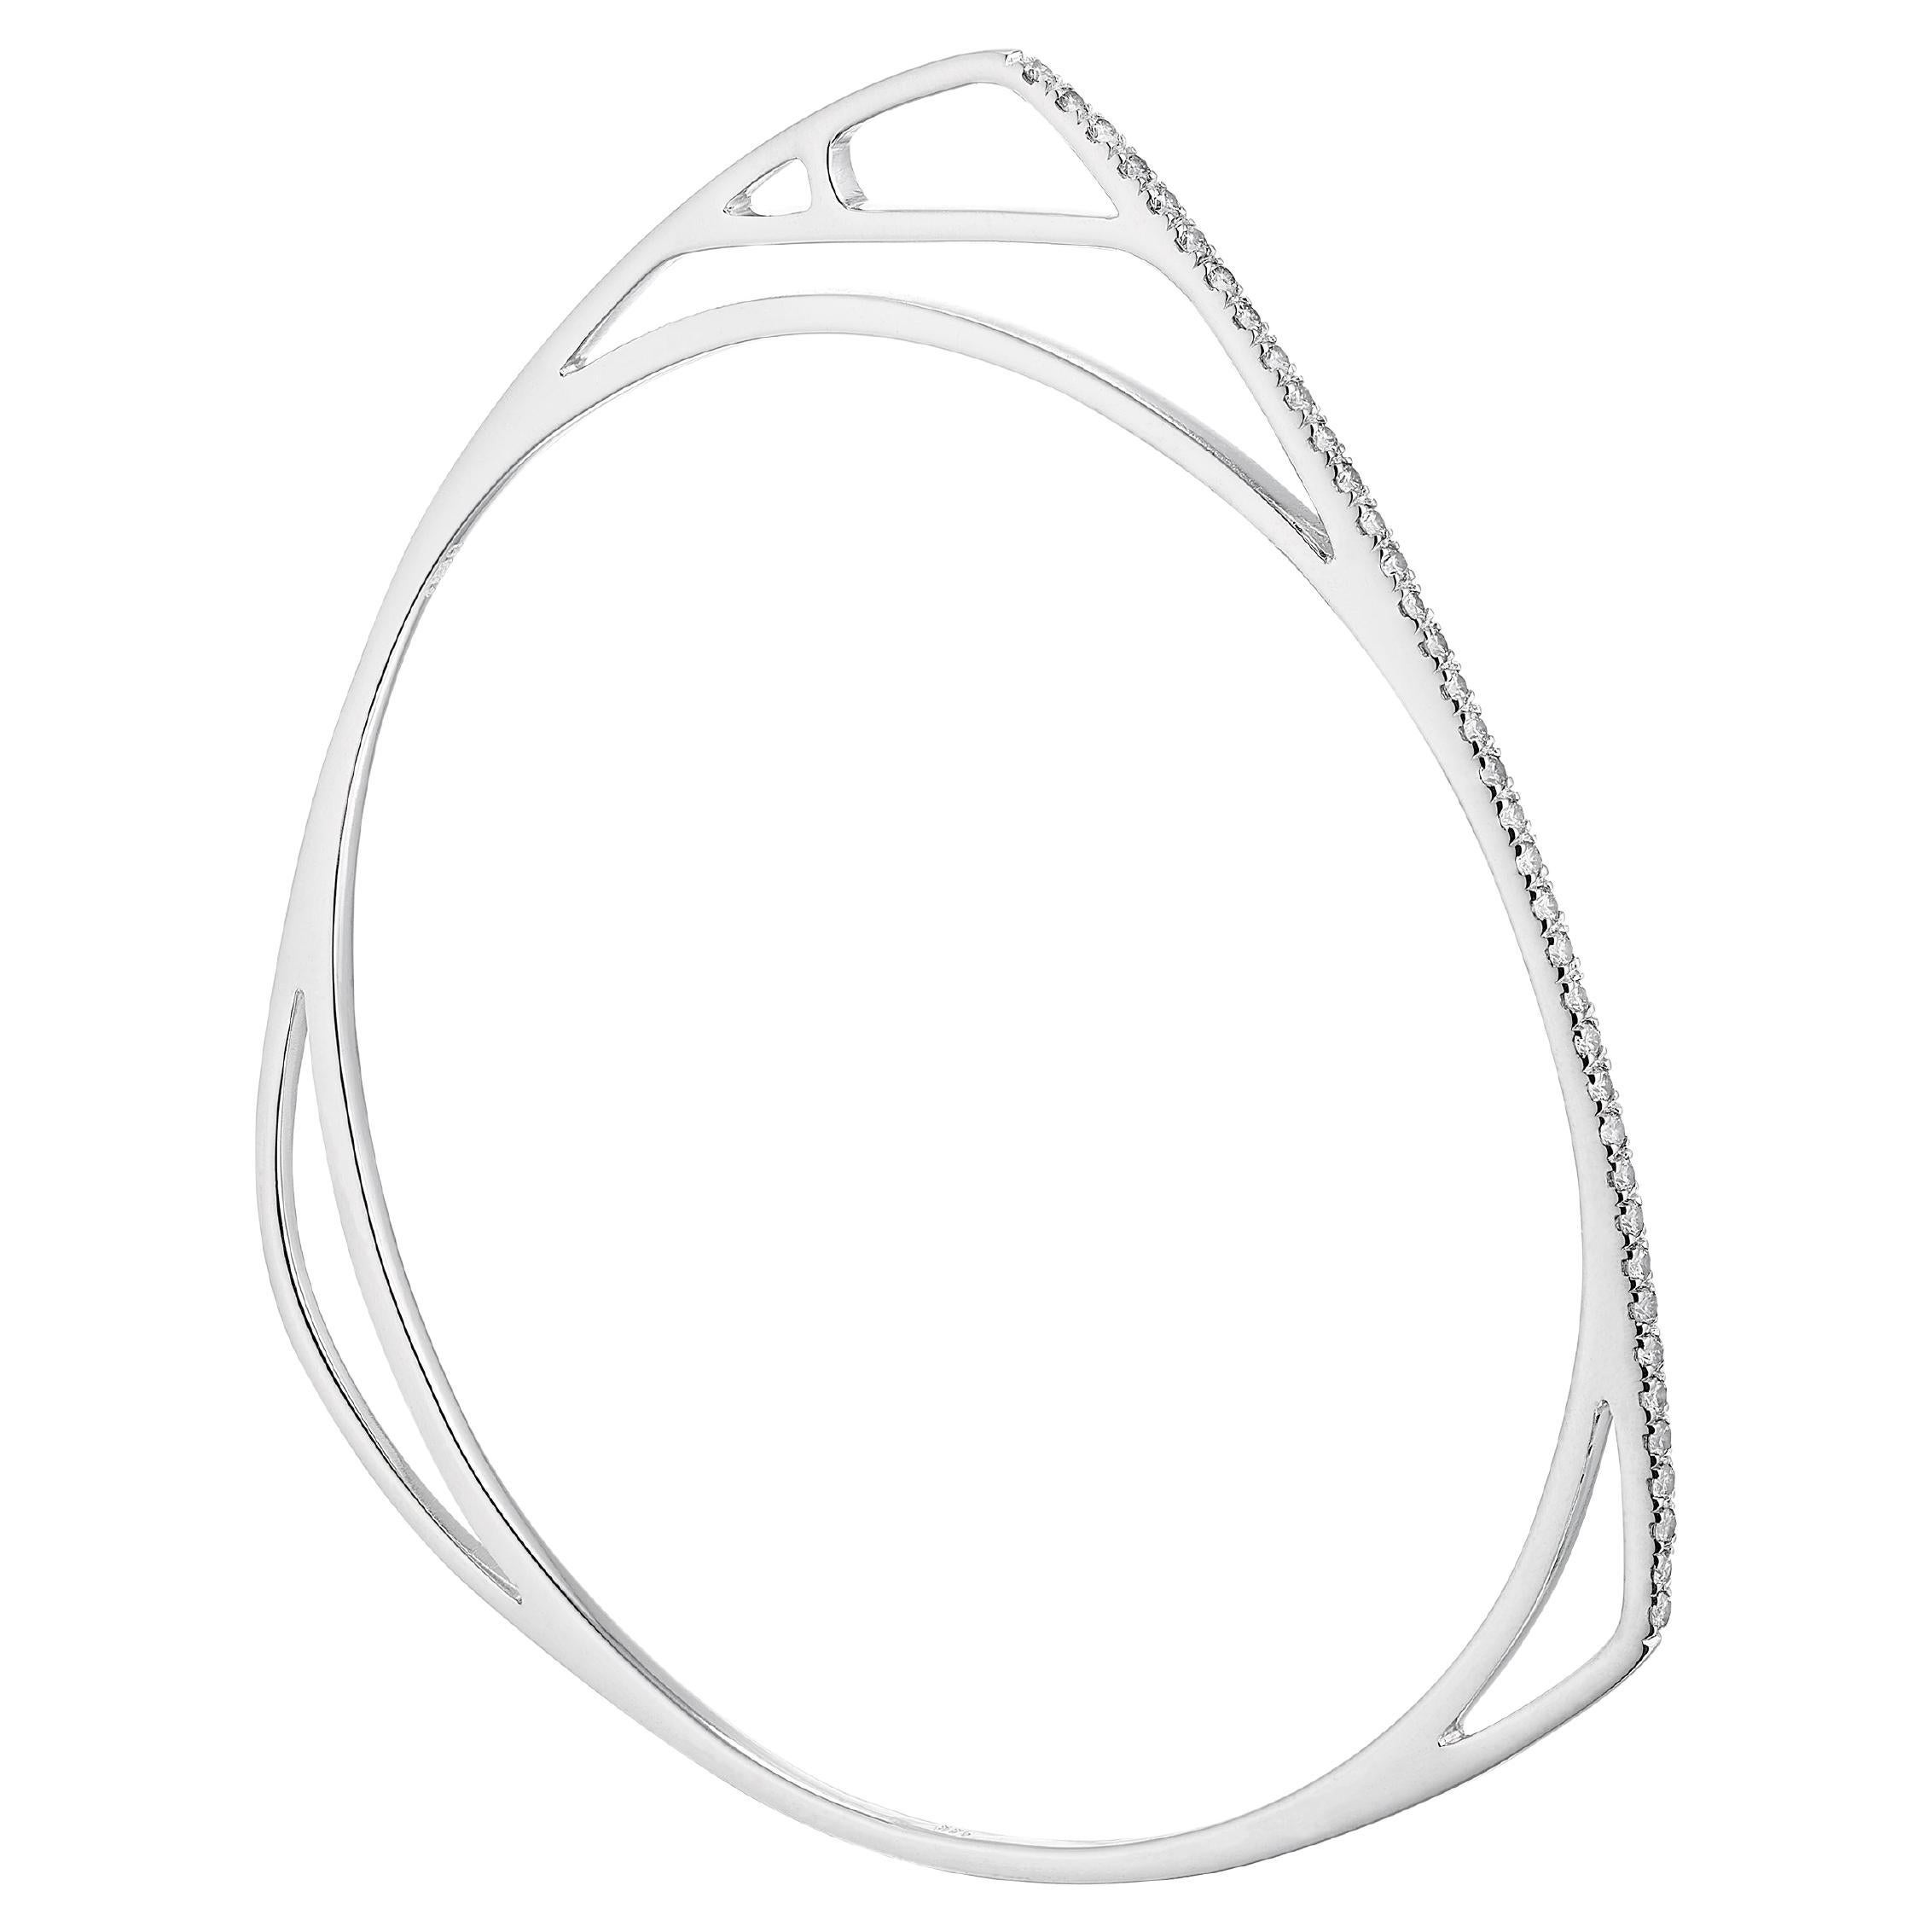 Anabela Chan Fine Sustainable Jewelry White Gold Diamond Morpho Bangle 5 Size M For Sale